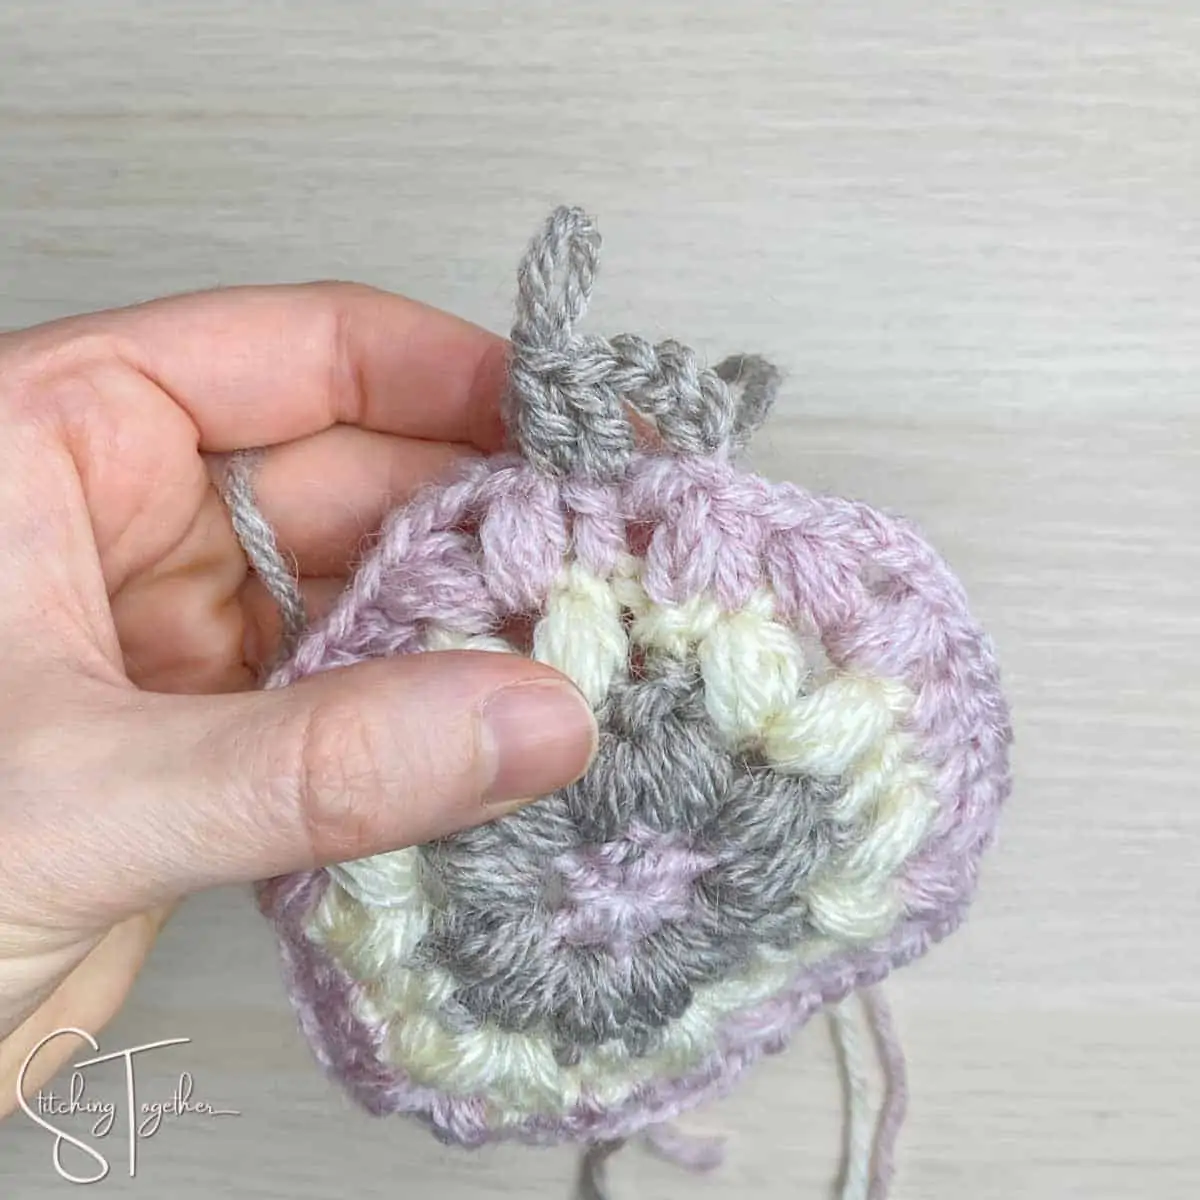 showing stitch placement for round 5 of a hexagon crochet